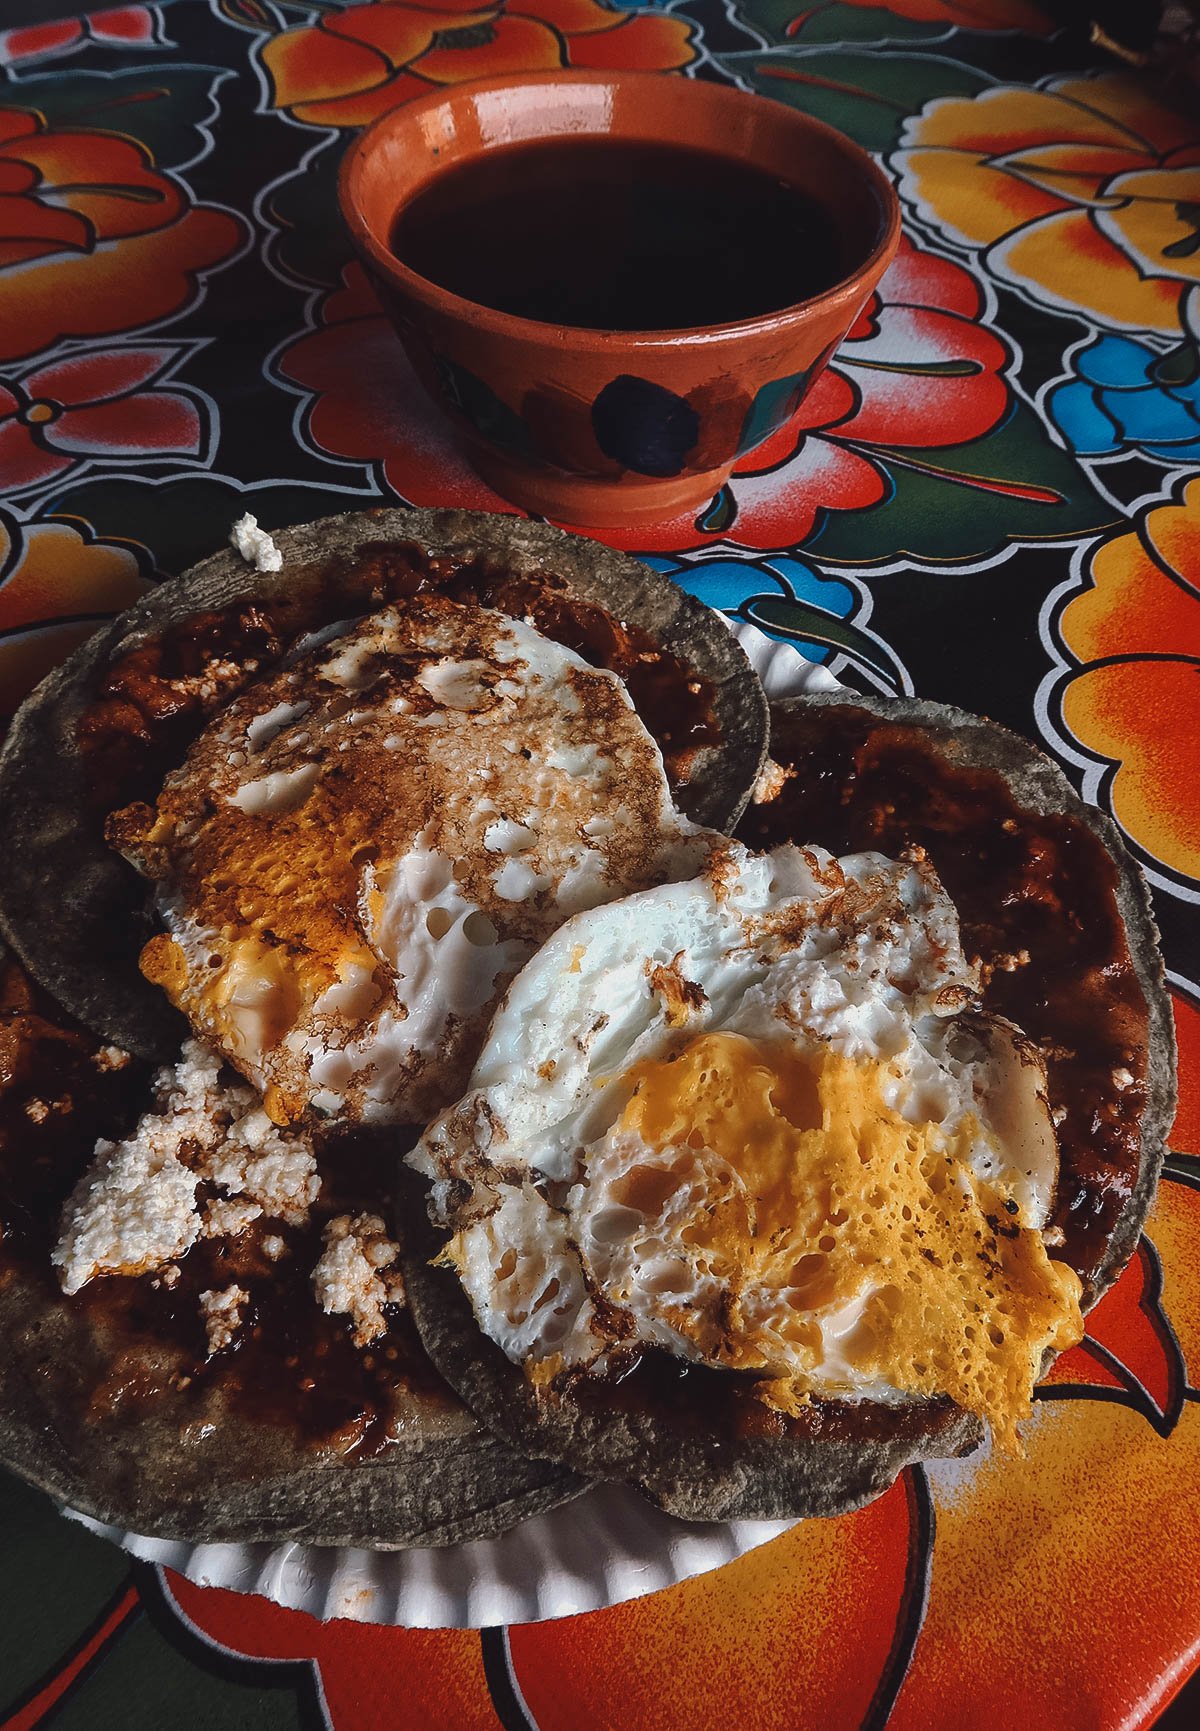 Memelas topped with fried eggs